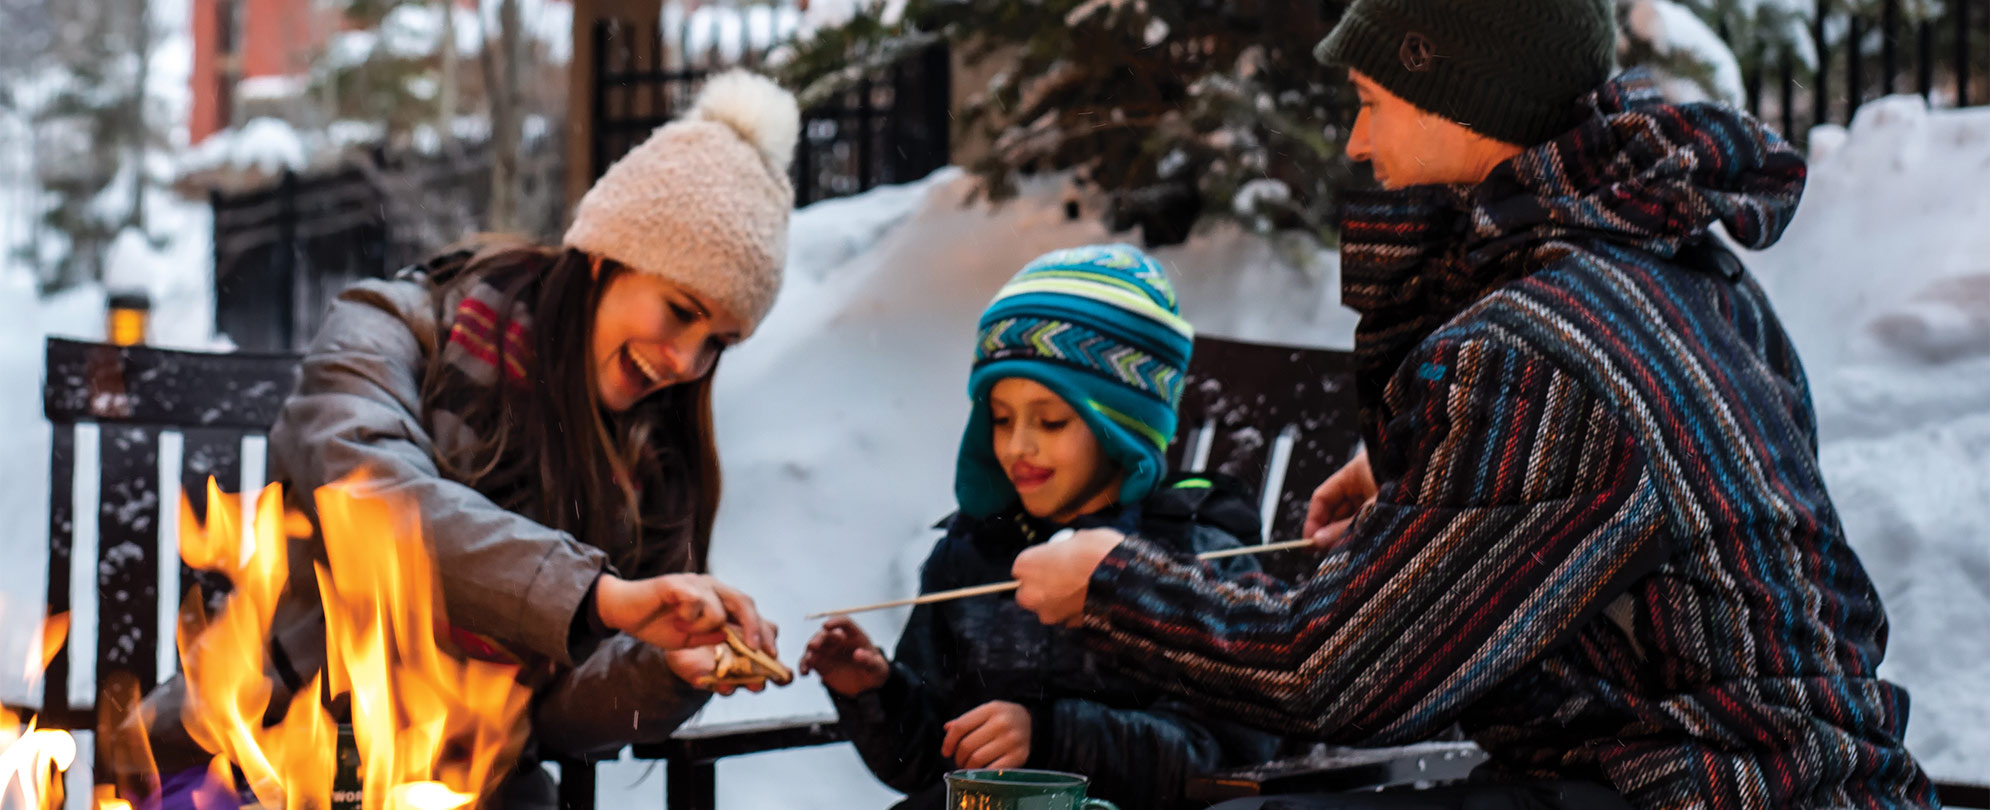 A mom, dad, and young son wearing winter clothes roast marshmallows around a fire at a WorldMark by Wyndham timeshare resort.